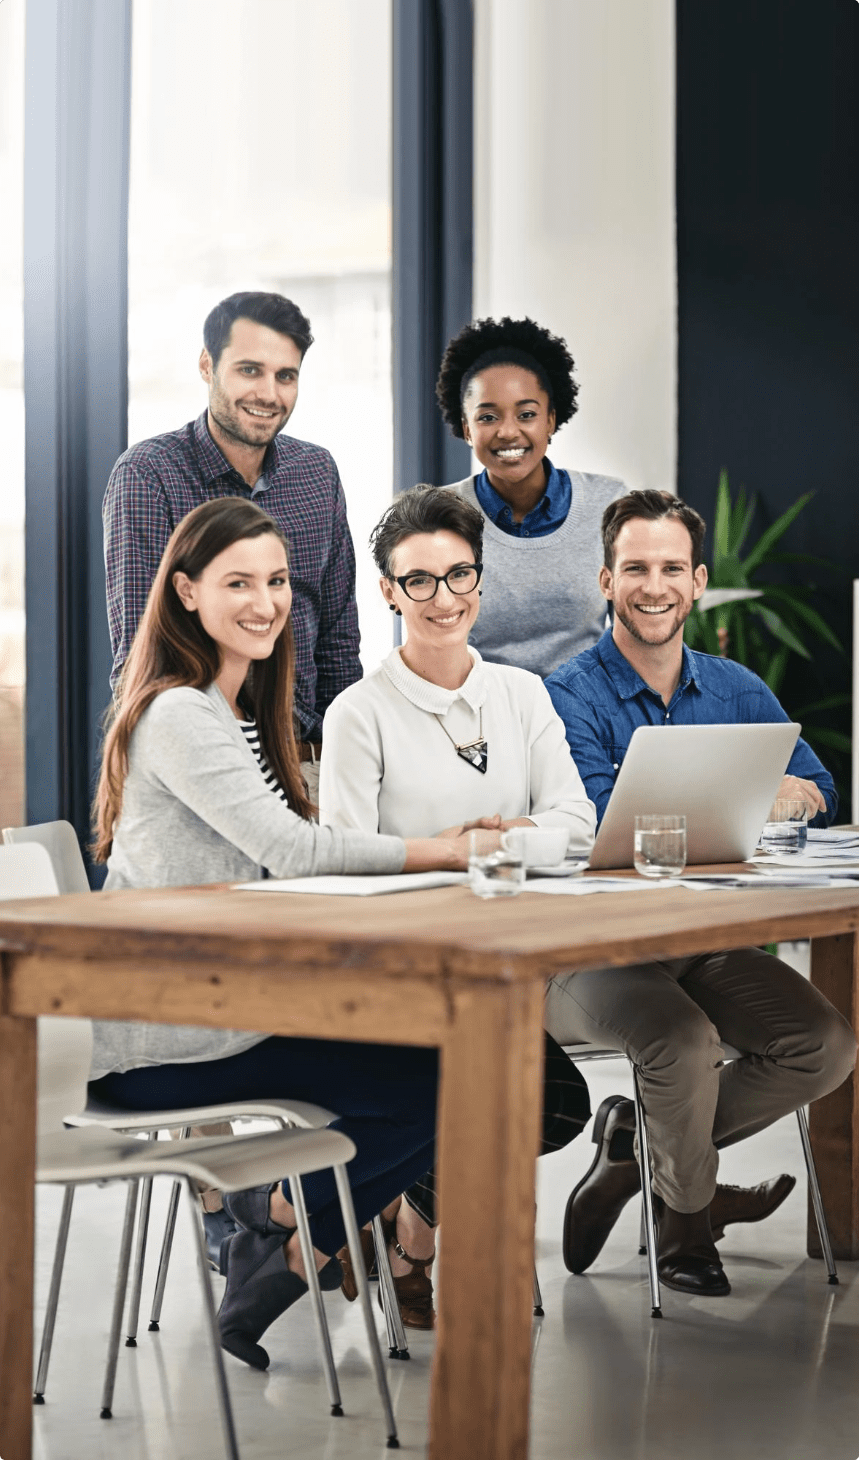 were-team-you-need-full-length-portrait-group-businesspeople-gathered-around-laptop-office